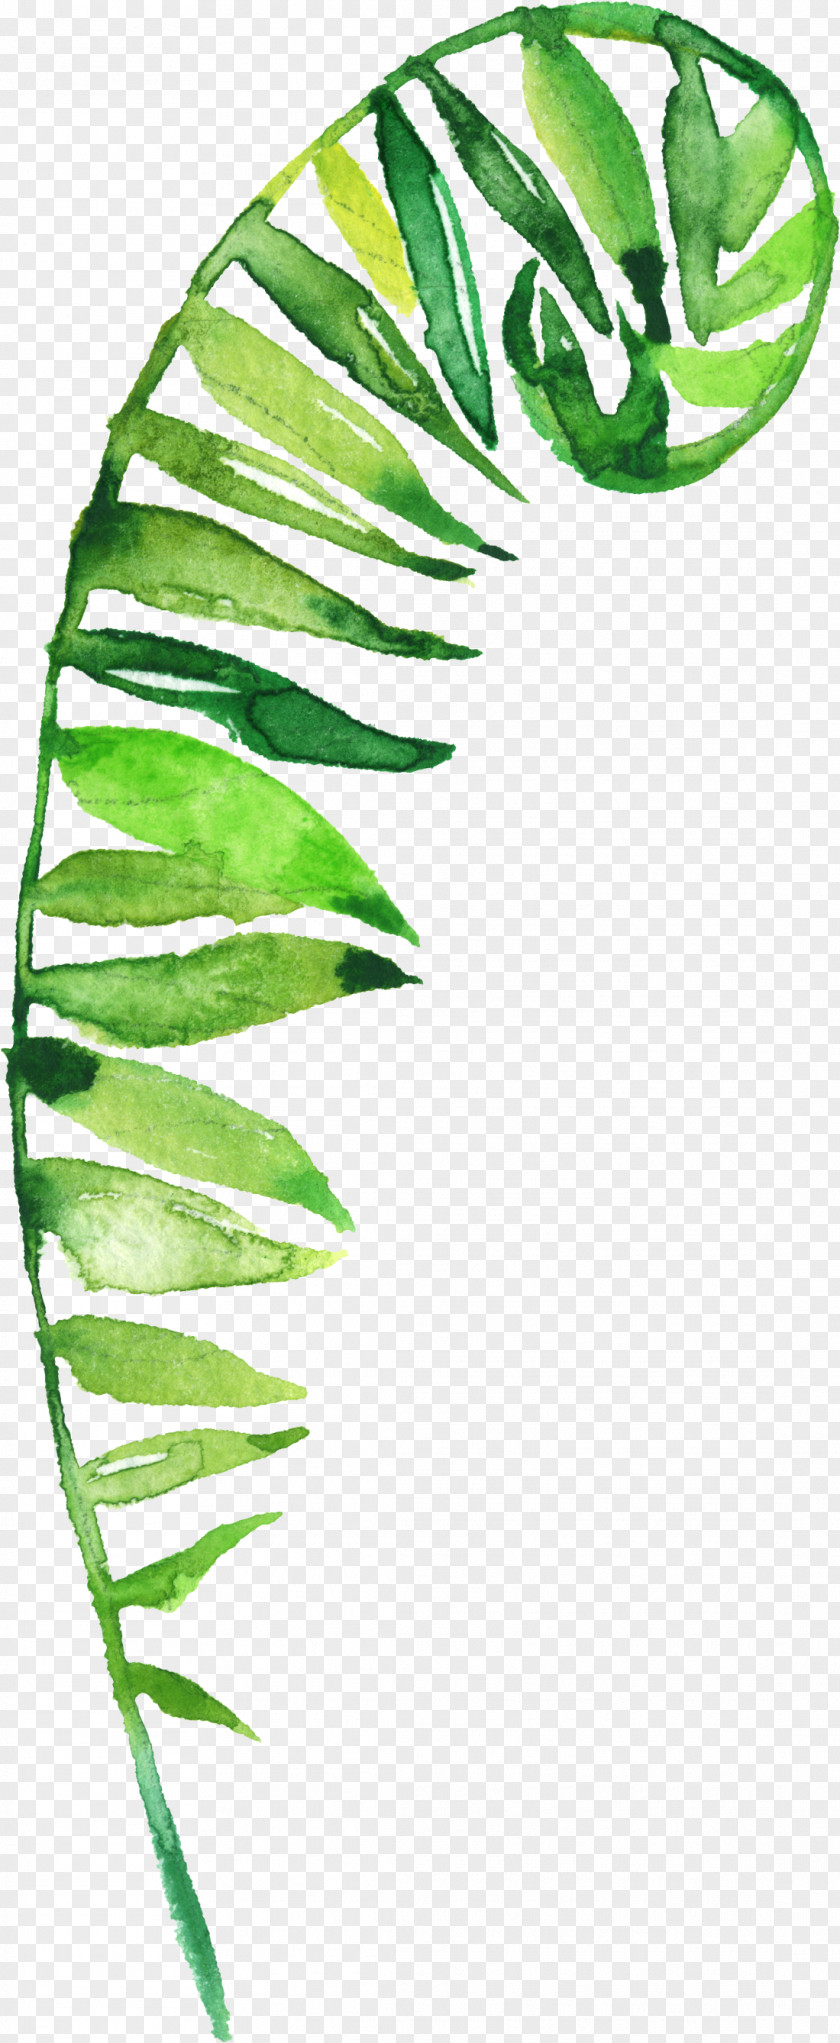 Hand-painted Grass Leaf Flower Clip Art PNG